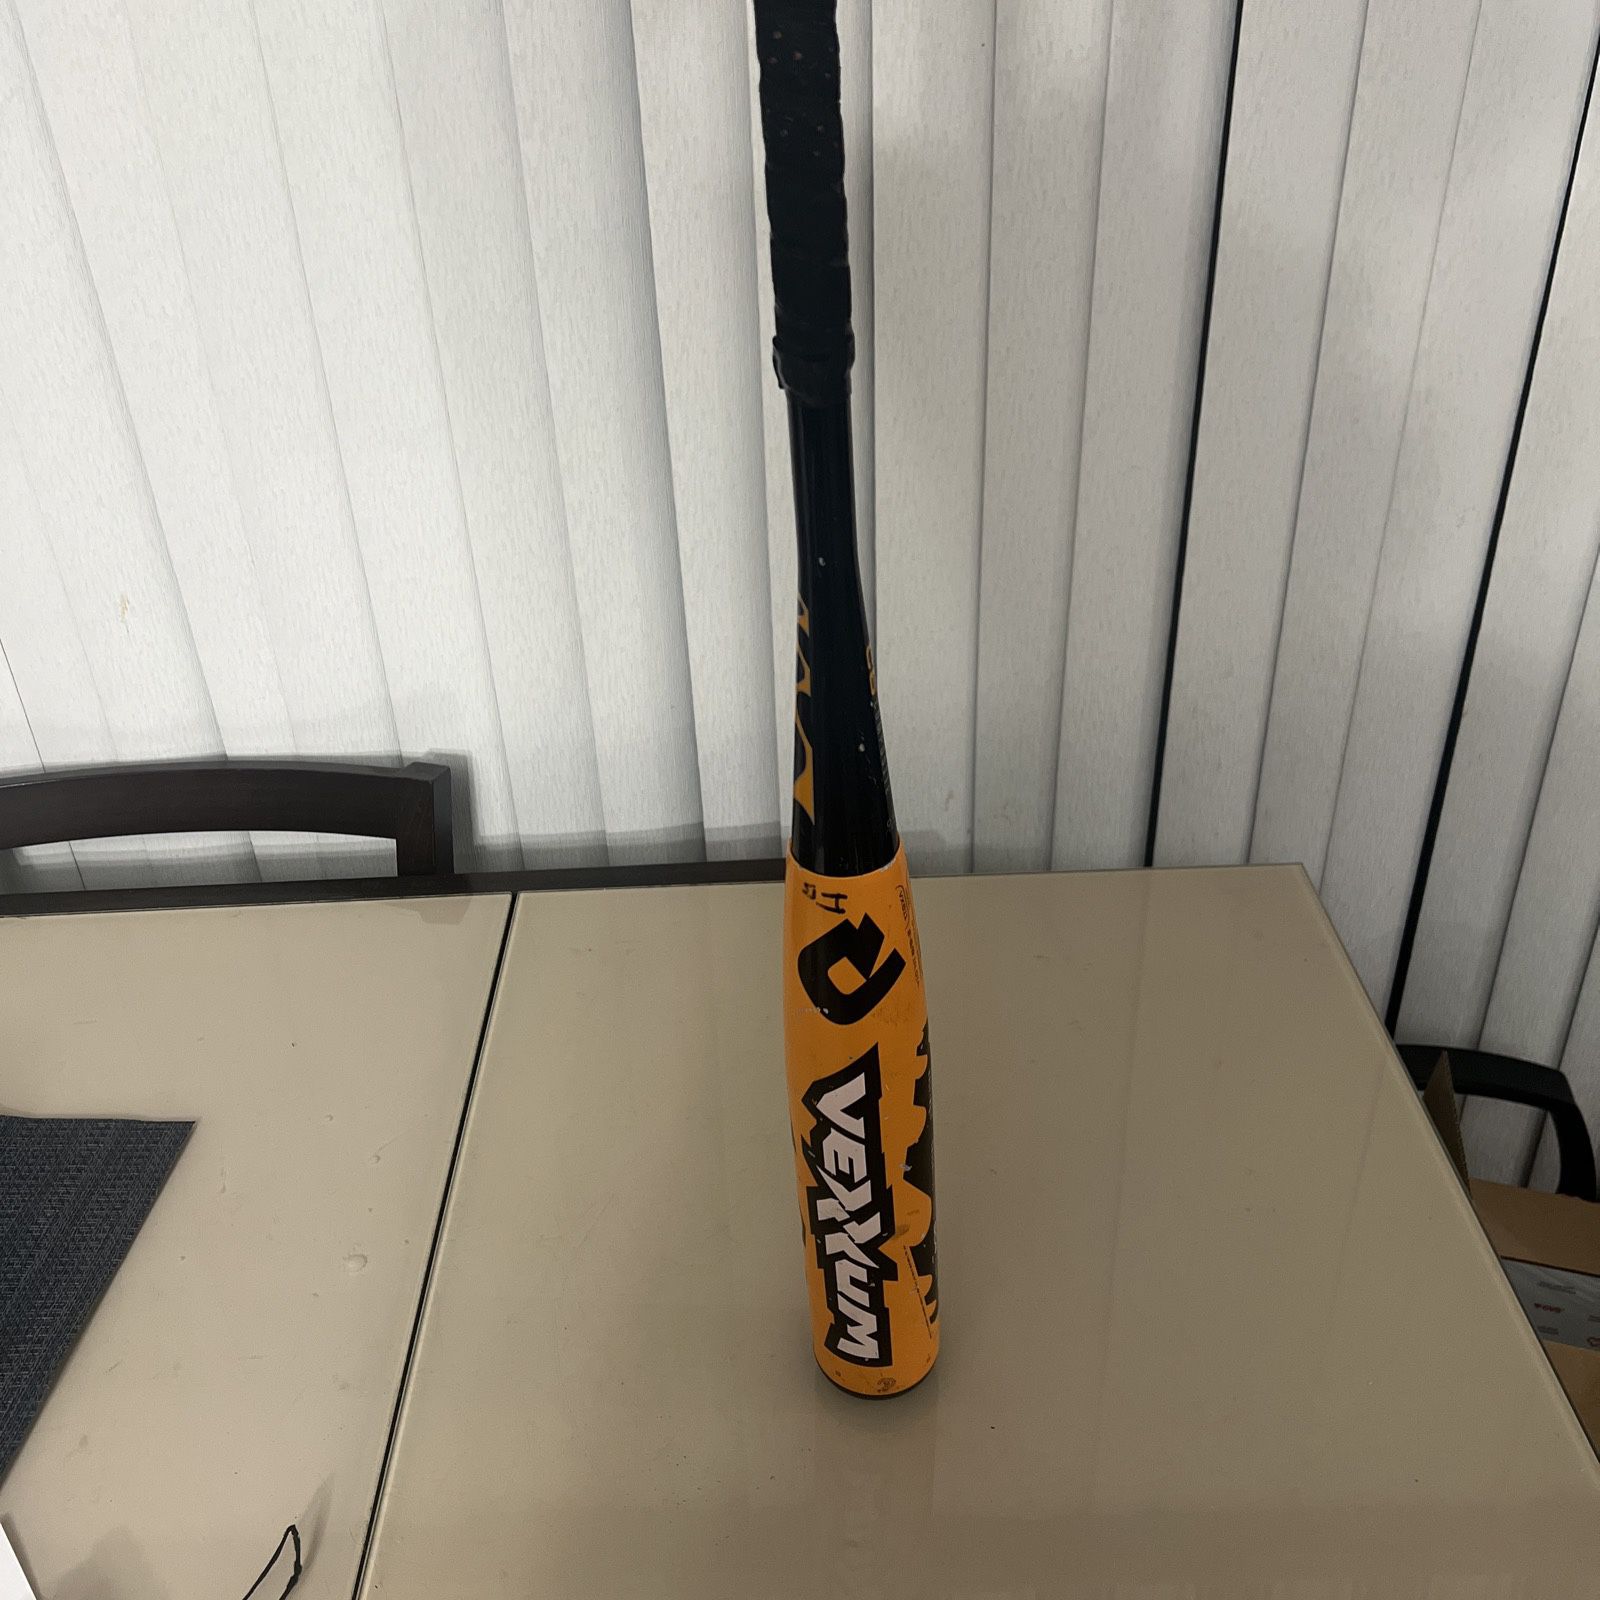 DEMARINI VEXXUM VX511 COMPOSITE -5, Alloy SC4 31” 26 OZ BASEBALL BAT. Used in good condition with noticeable cosmetic blemishes. There are no dents or